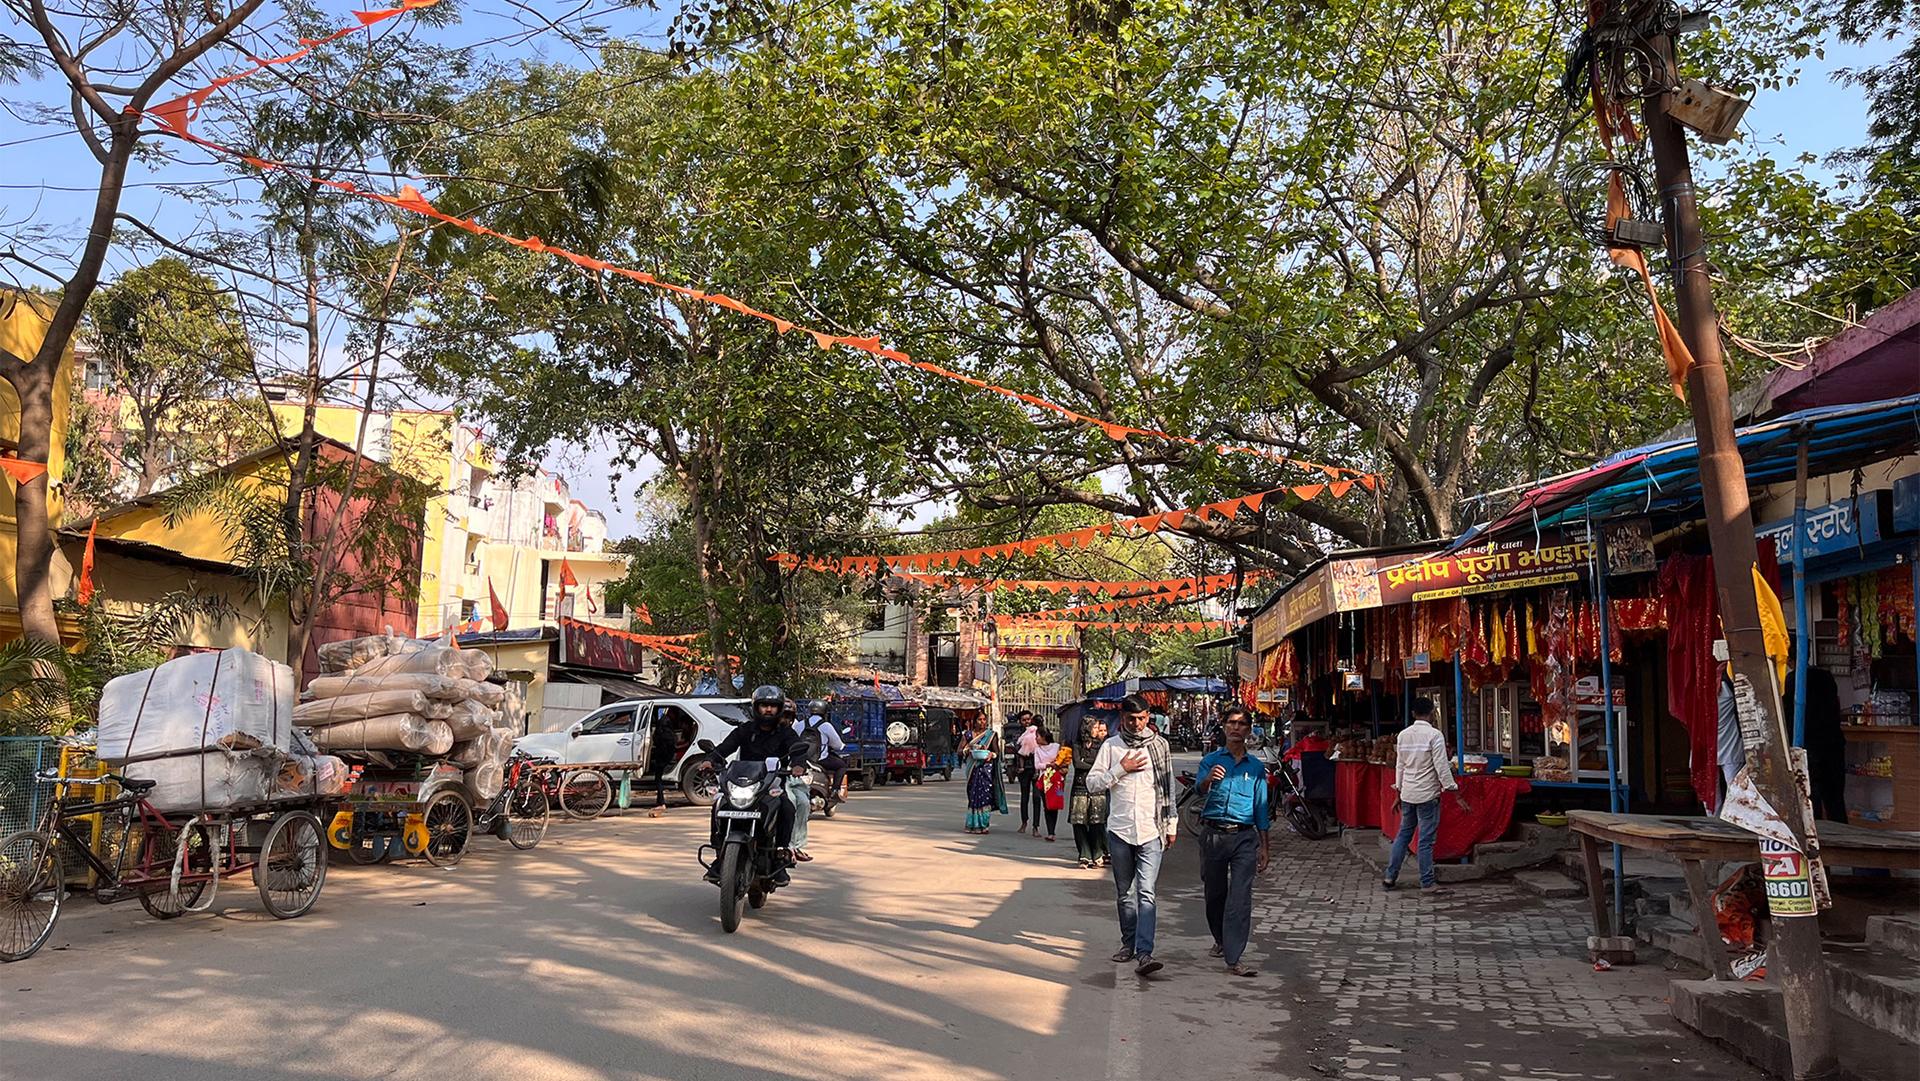 Saffron flags adorn a street outside a Hindu temple in Ranchi in India. Hindu nationalists insist that Sarnaism, or tribal religion, is the same as Hinduism.